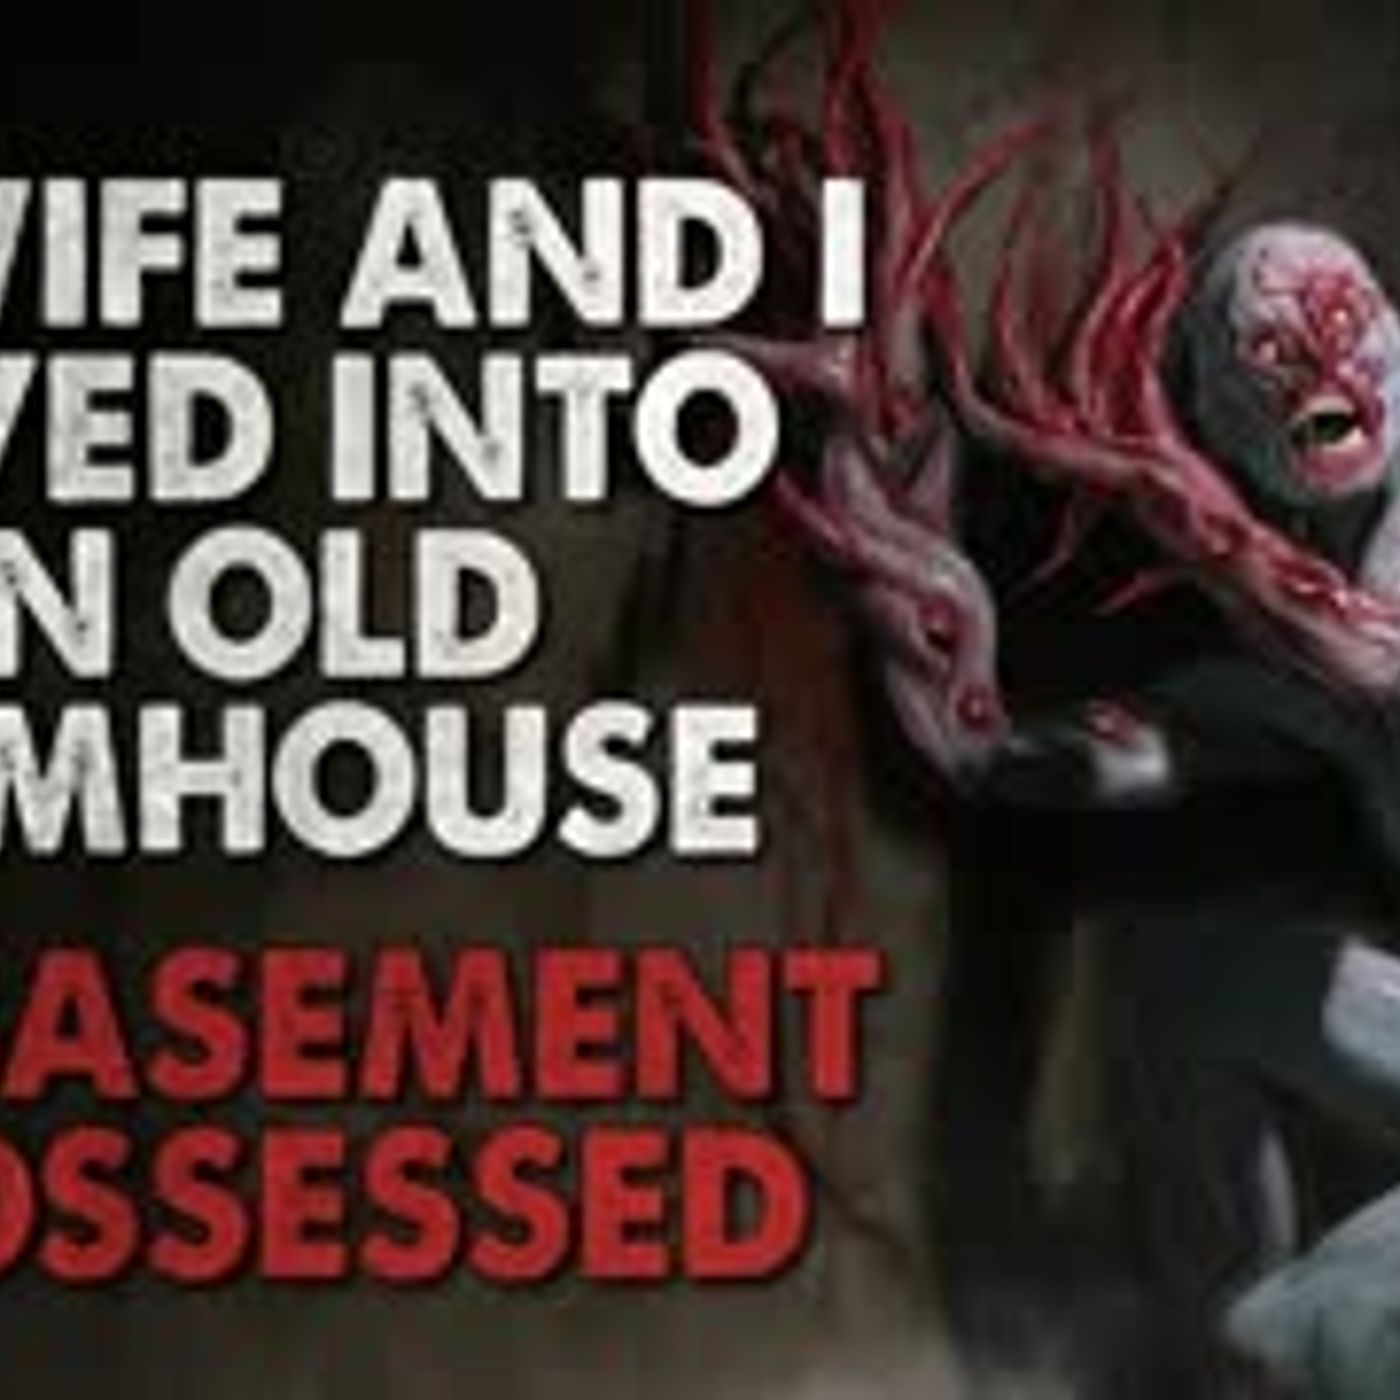 "My Wife and I Moved into an Old Farmhouse. The Basement is Possessed" Creepypasta